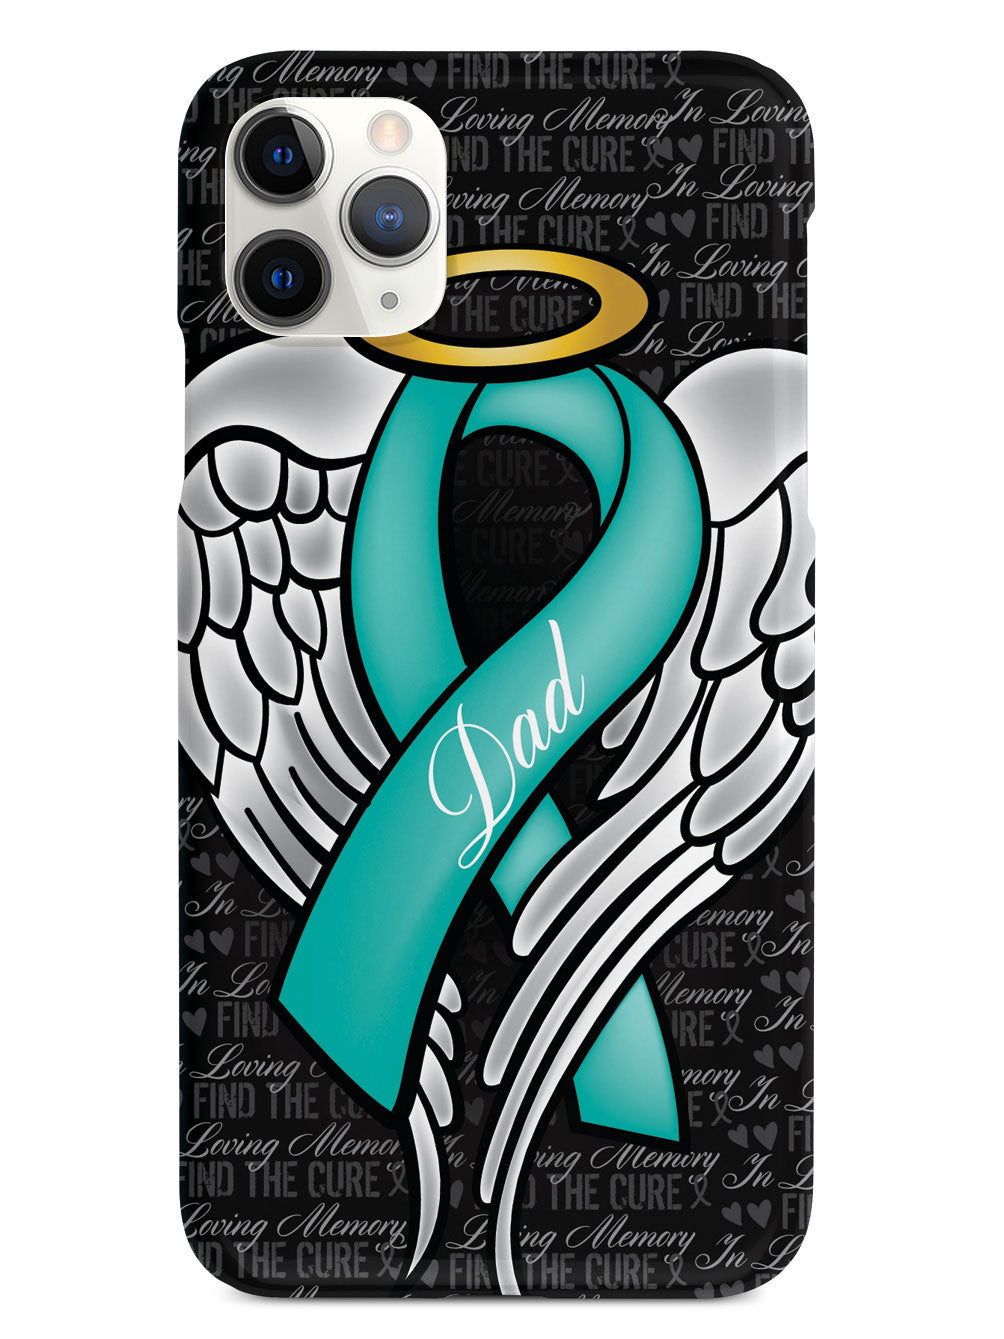 In Loving Memory of My Dad - Teal Ribbon Case